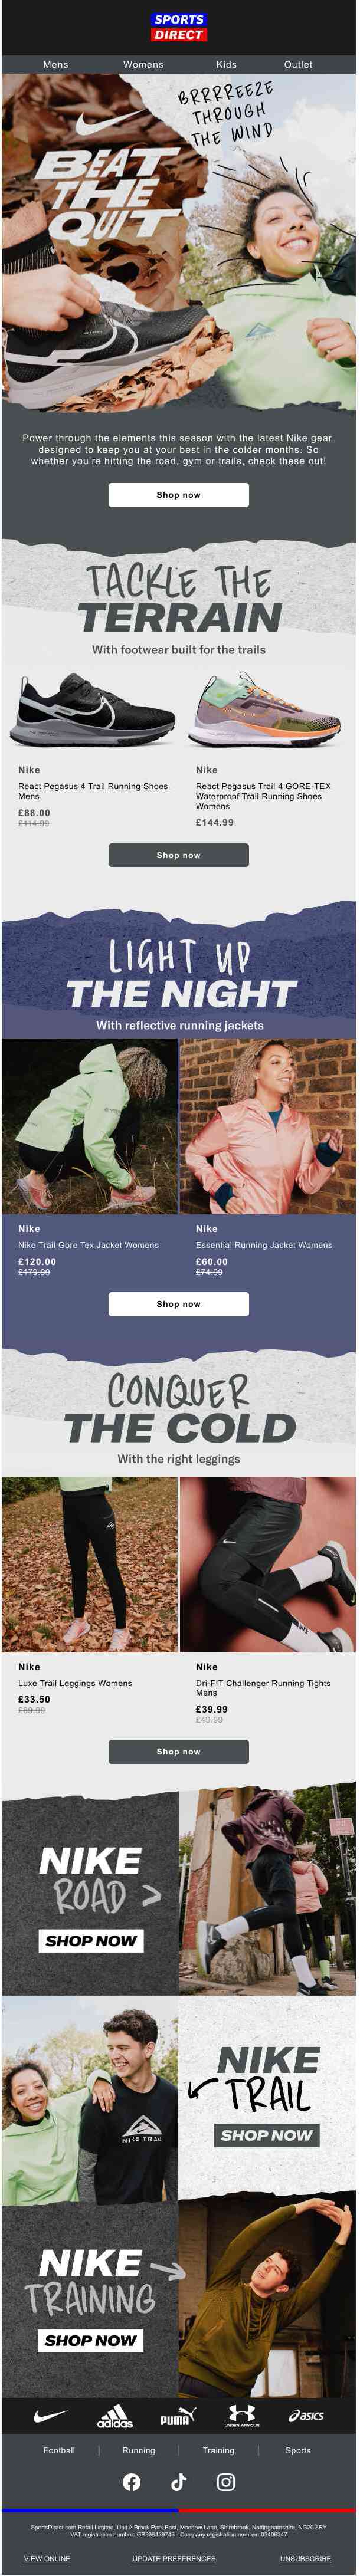 Beat the Quit this winter with Nike